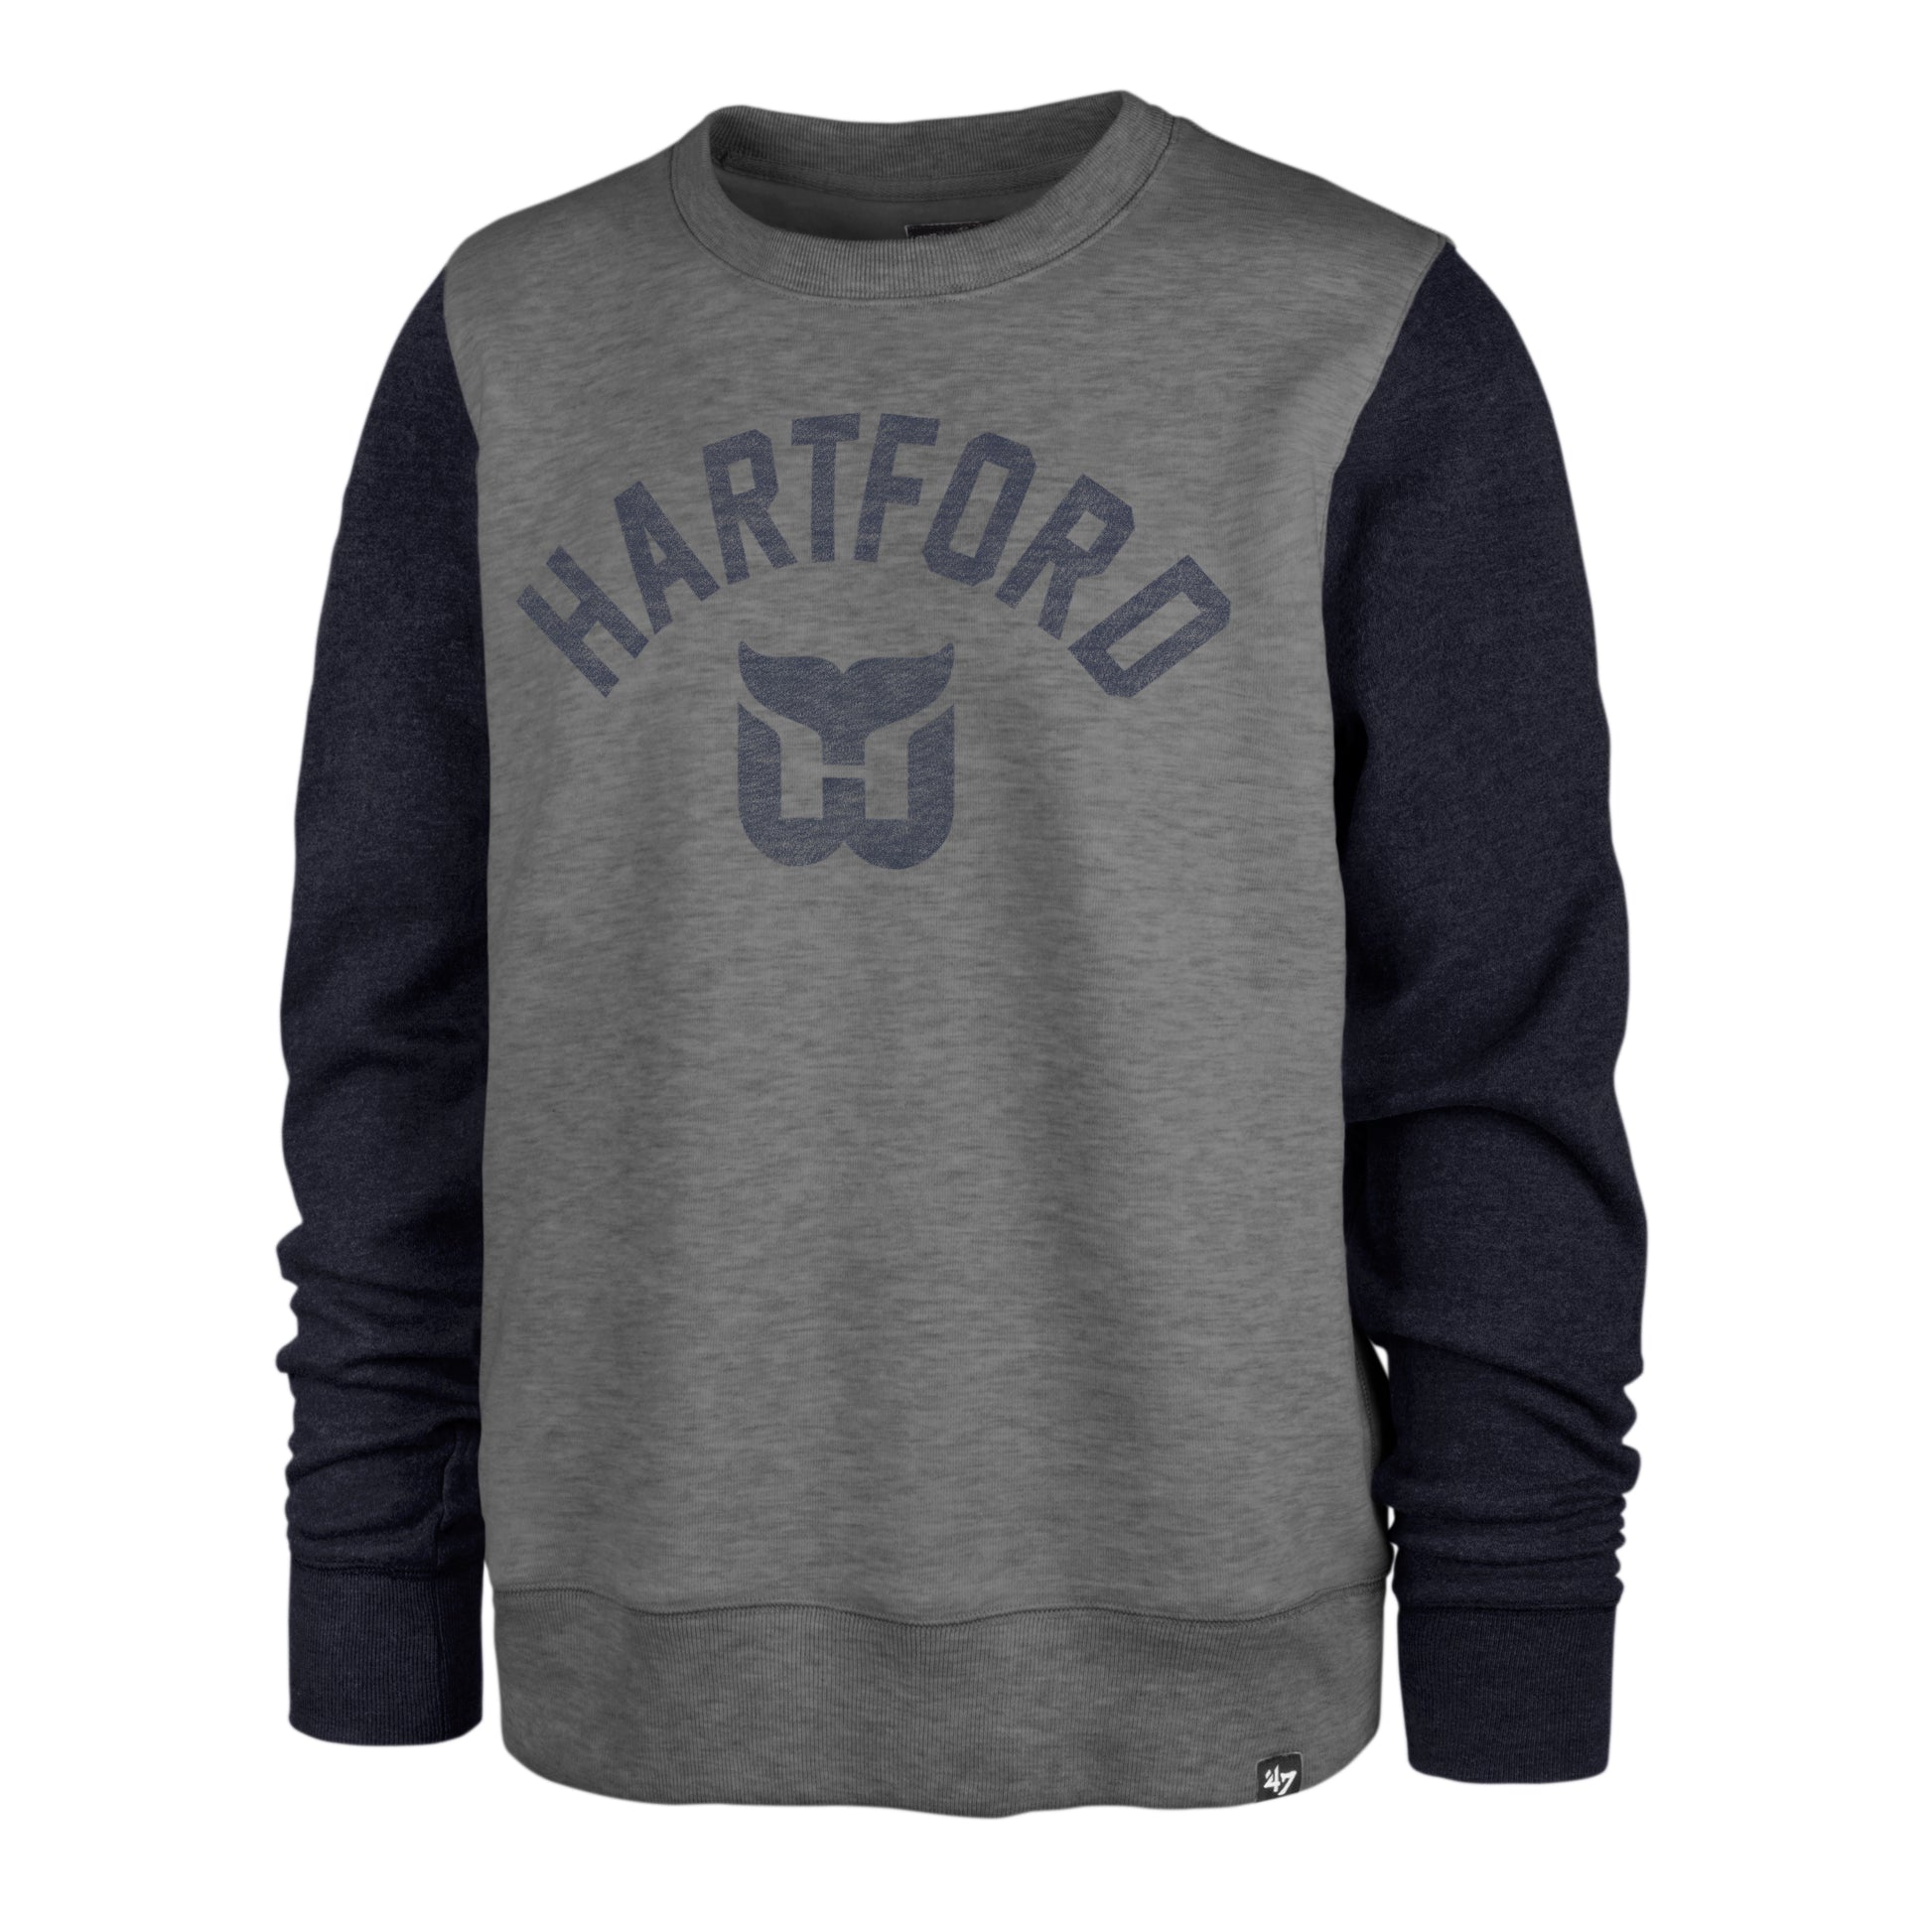 Dark gray crewneck with navy sleeves and Hartford with Whalers logo in navy on front